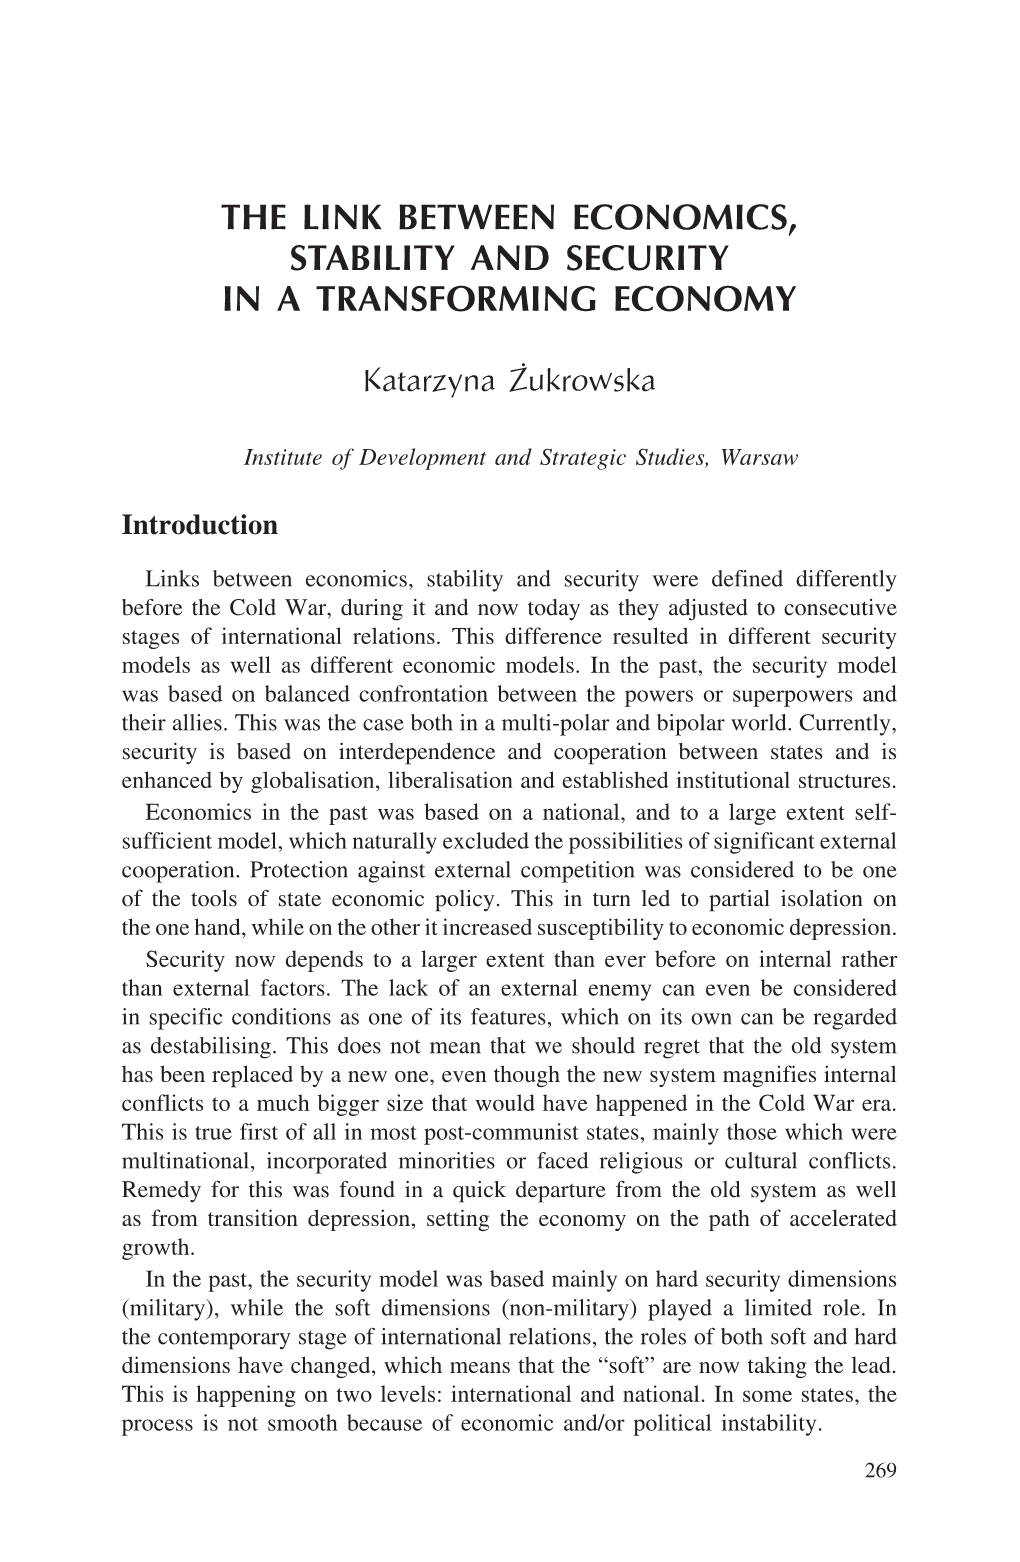 The Link Between Economics, Stability and Security in a Transforming Economy